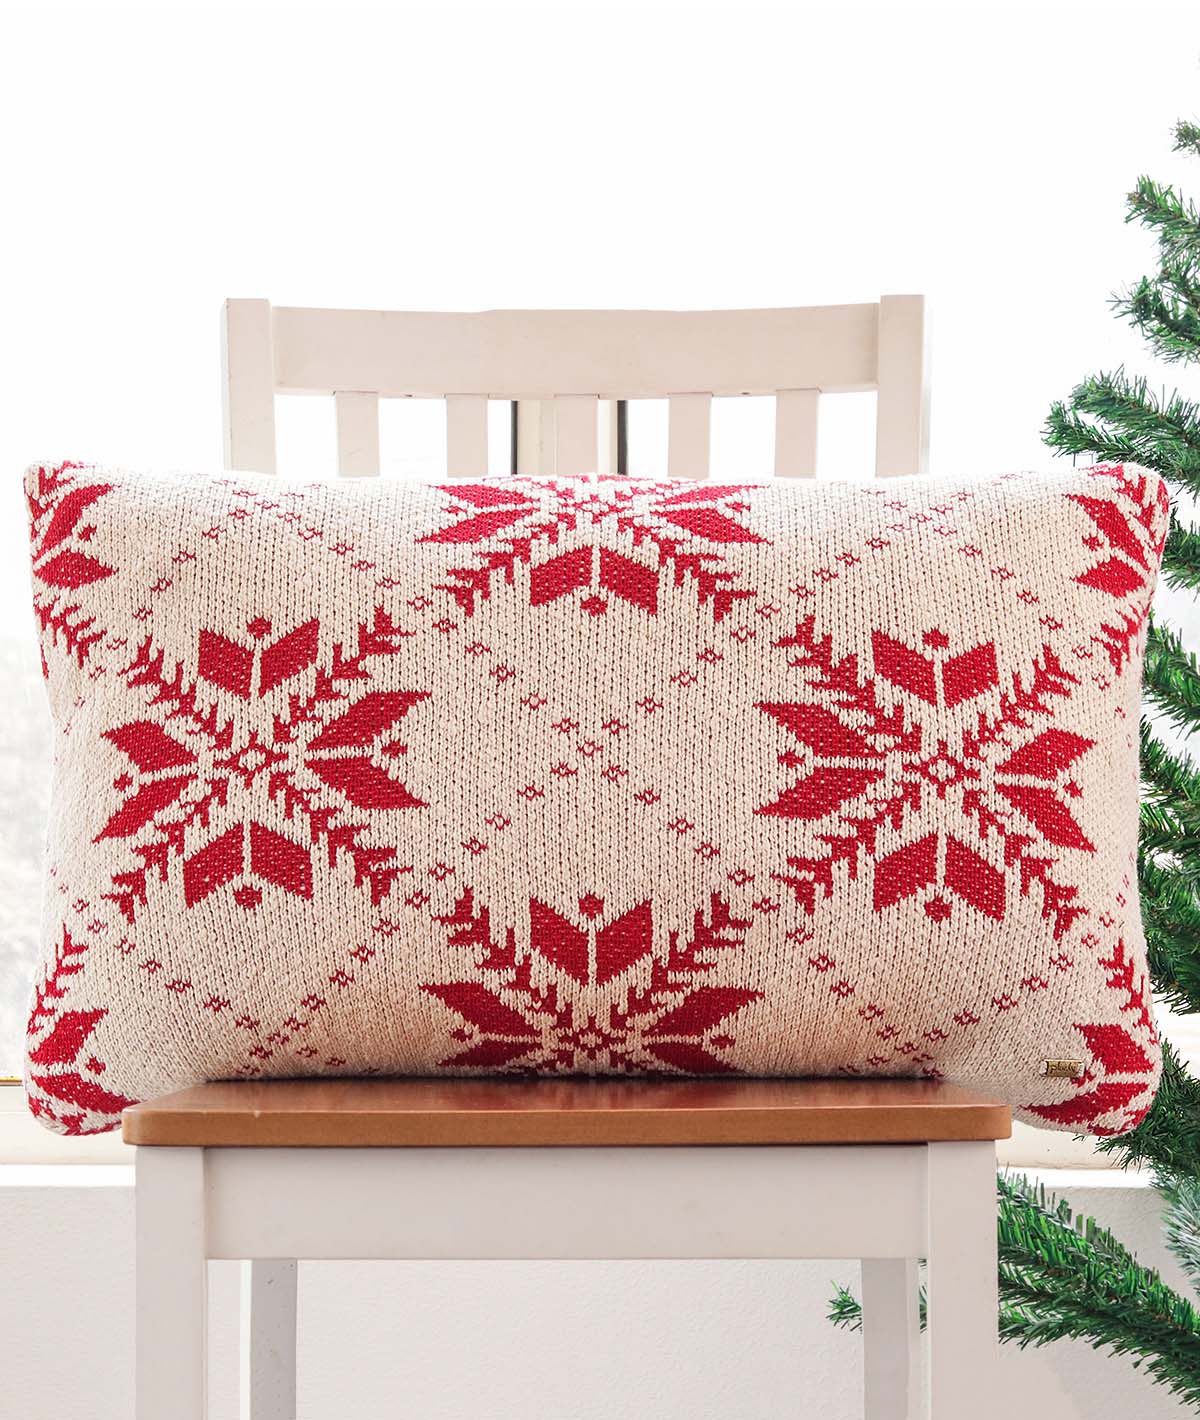 Snowflakes Cotton Knitted Decorative Natural & Red Color 16 x 24 Inches Pillow Covers